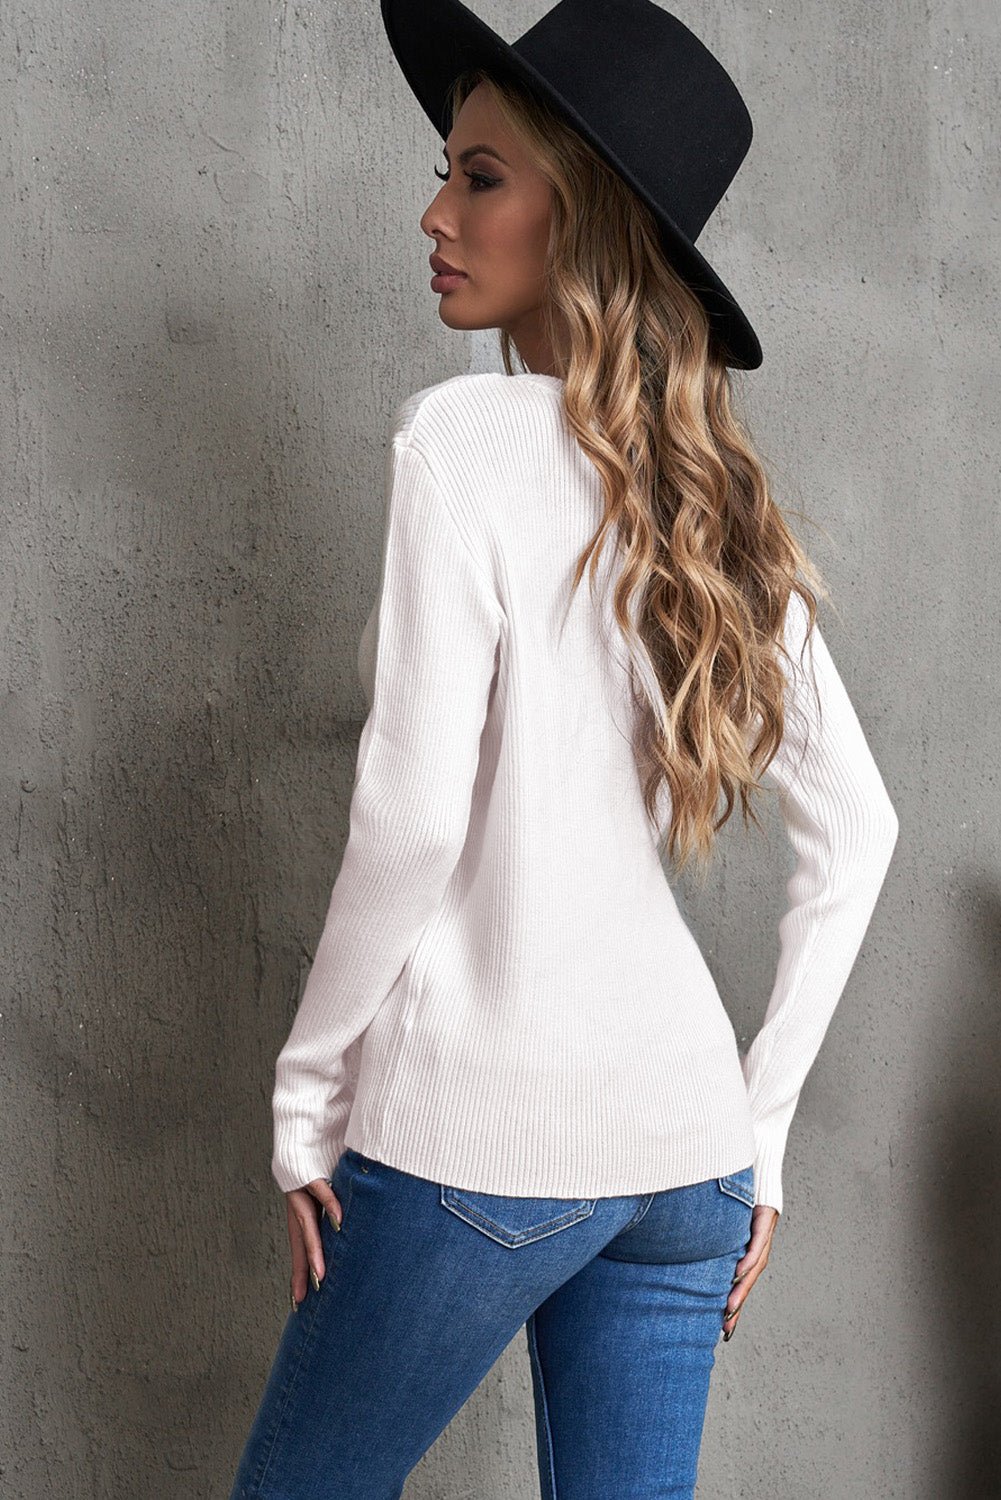 One-Shoulder Long Sleeve Ribbed Top - Fashion Girl Online Store